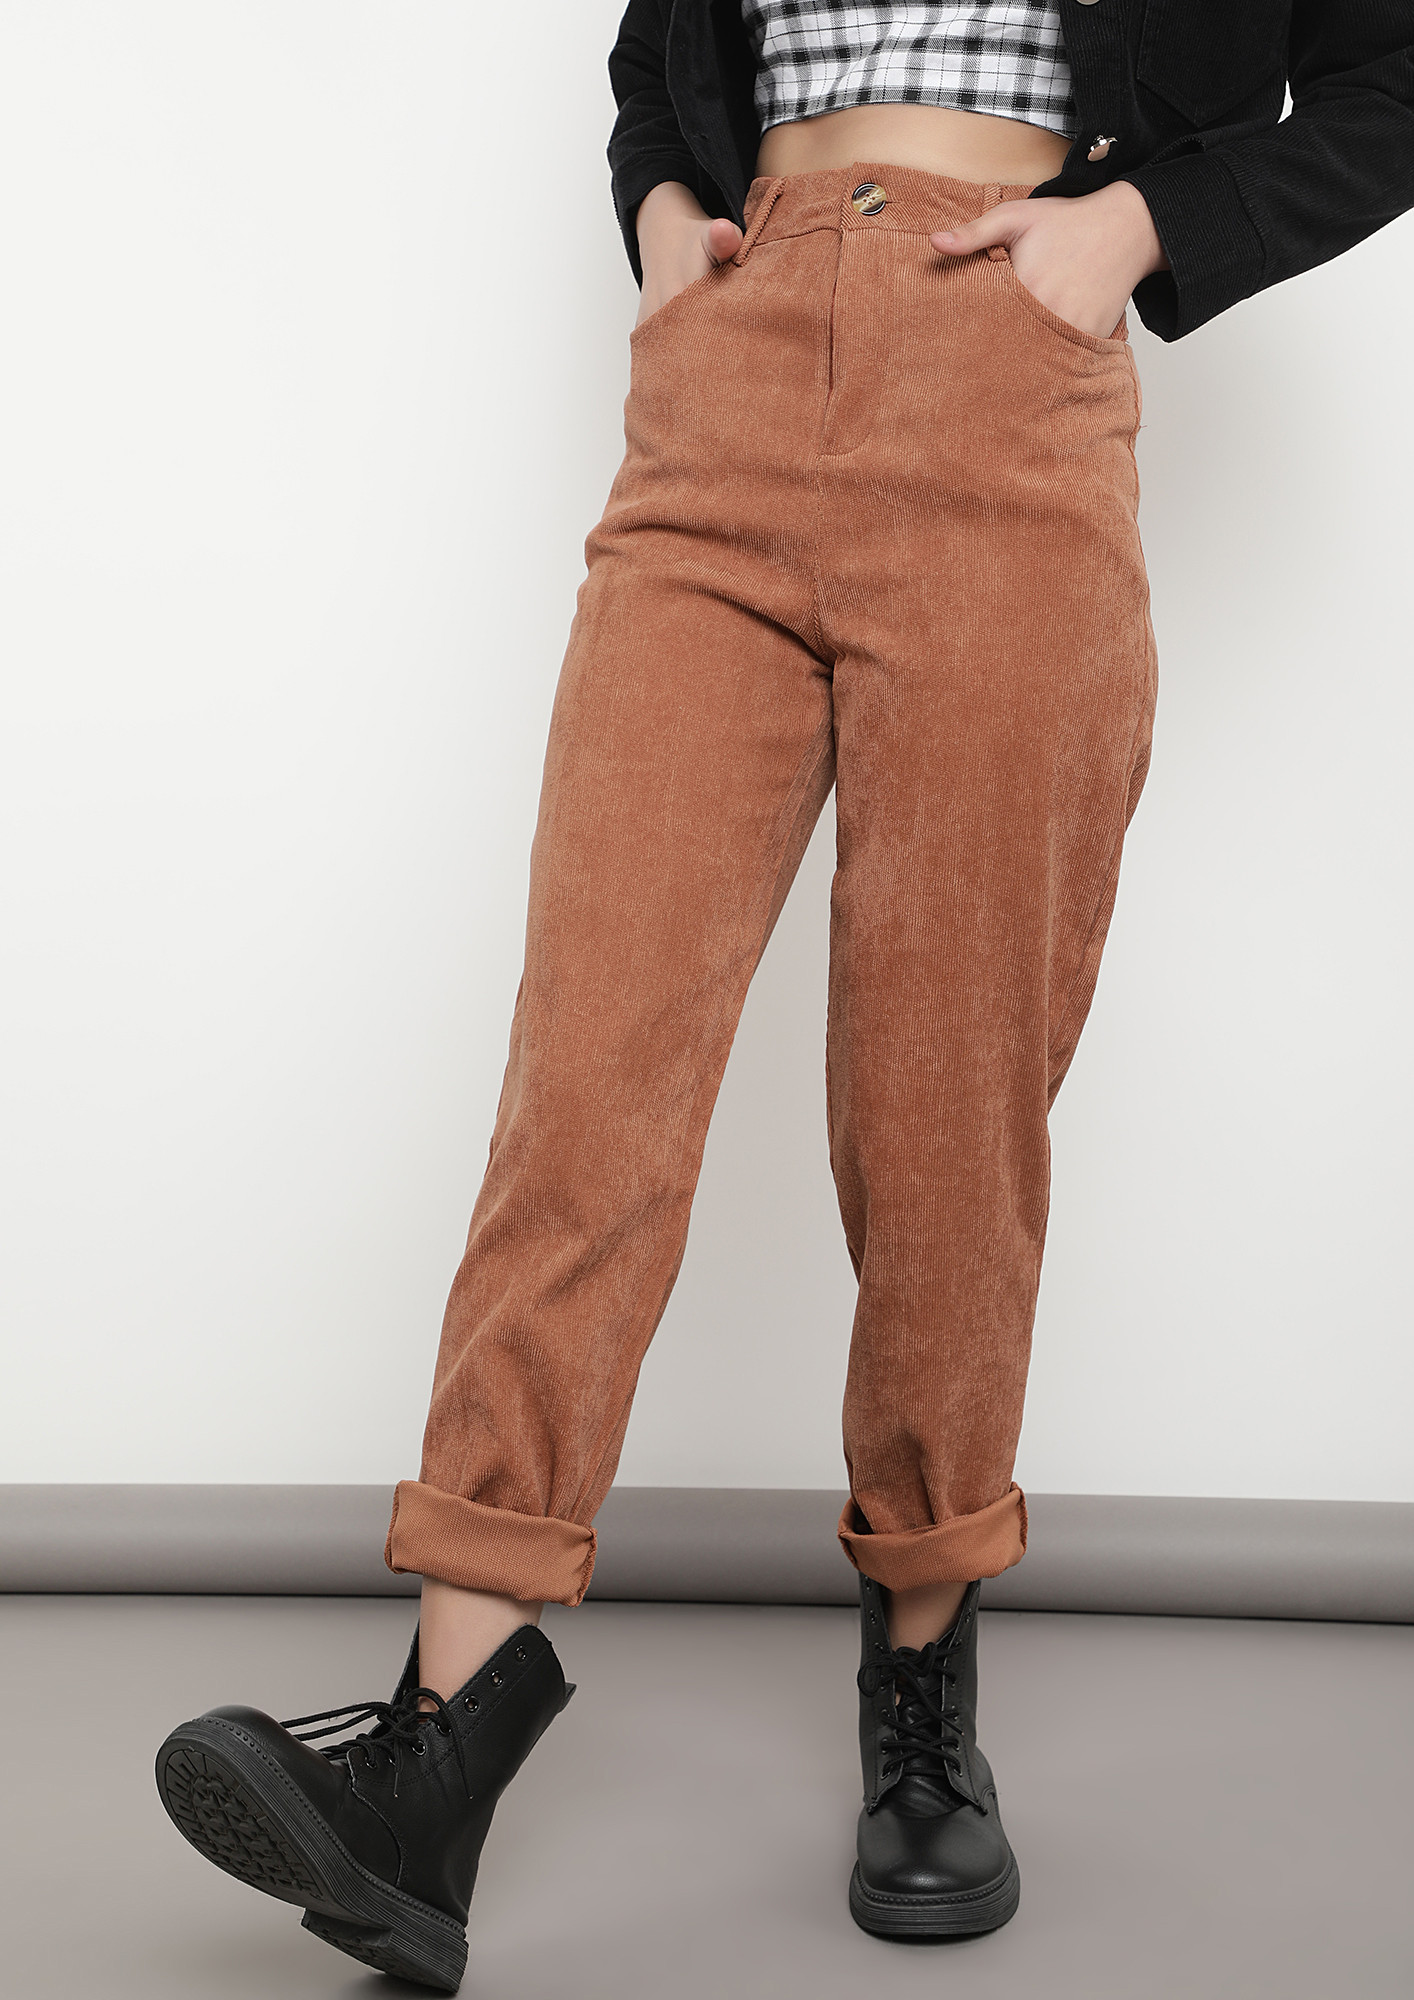 The latest collection of smart trousers in the size 3XS for women   FASHIOLAin